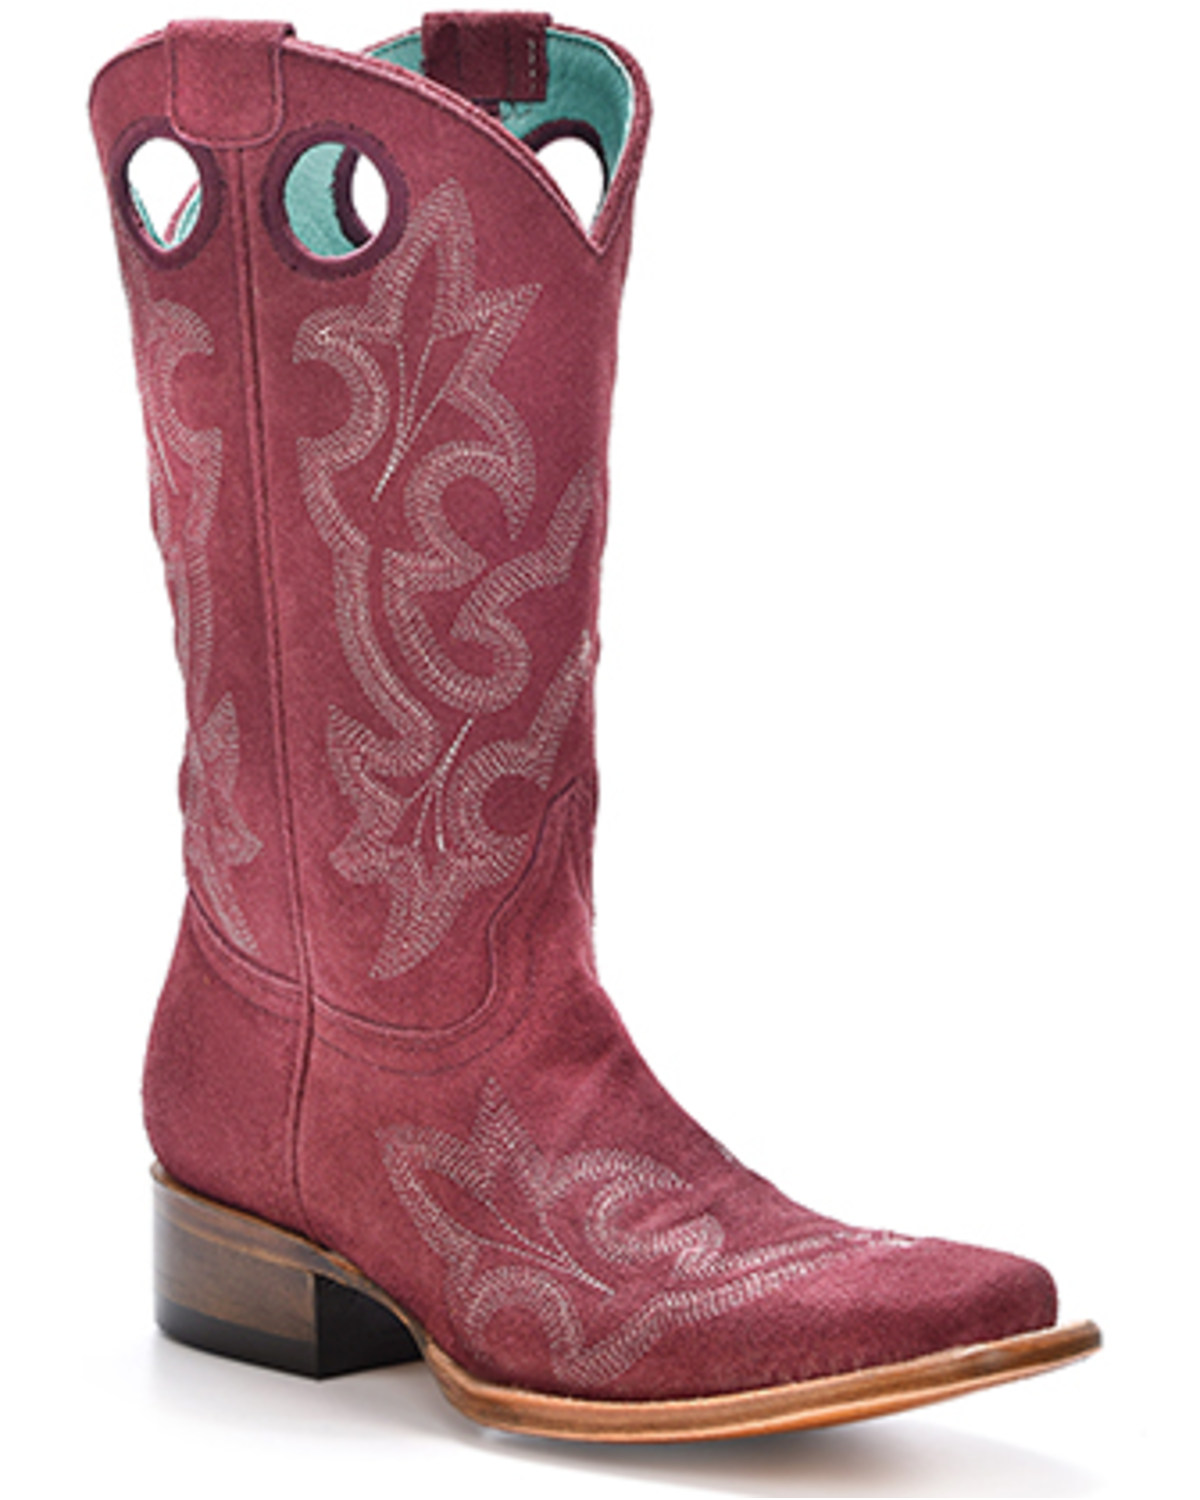 Corral Girls' Embroidered Western Boots - Square Toe